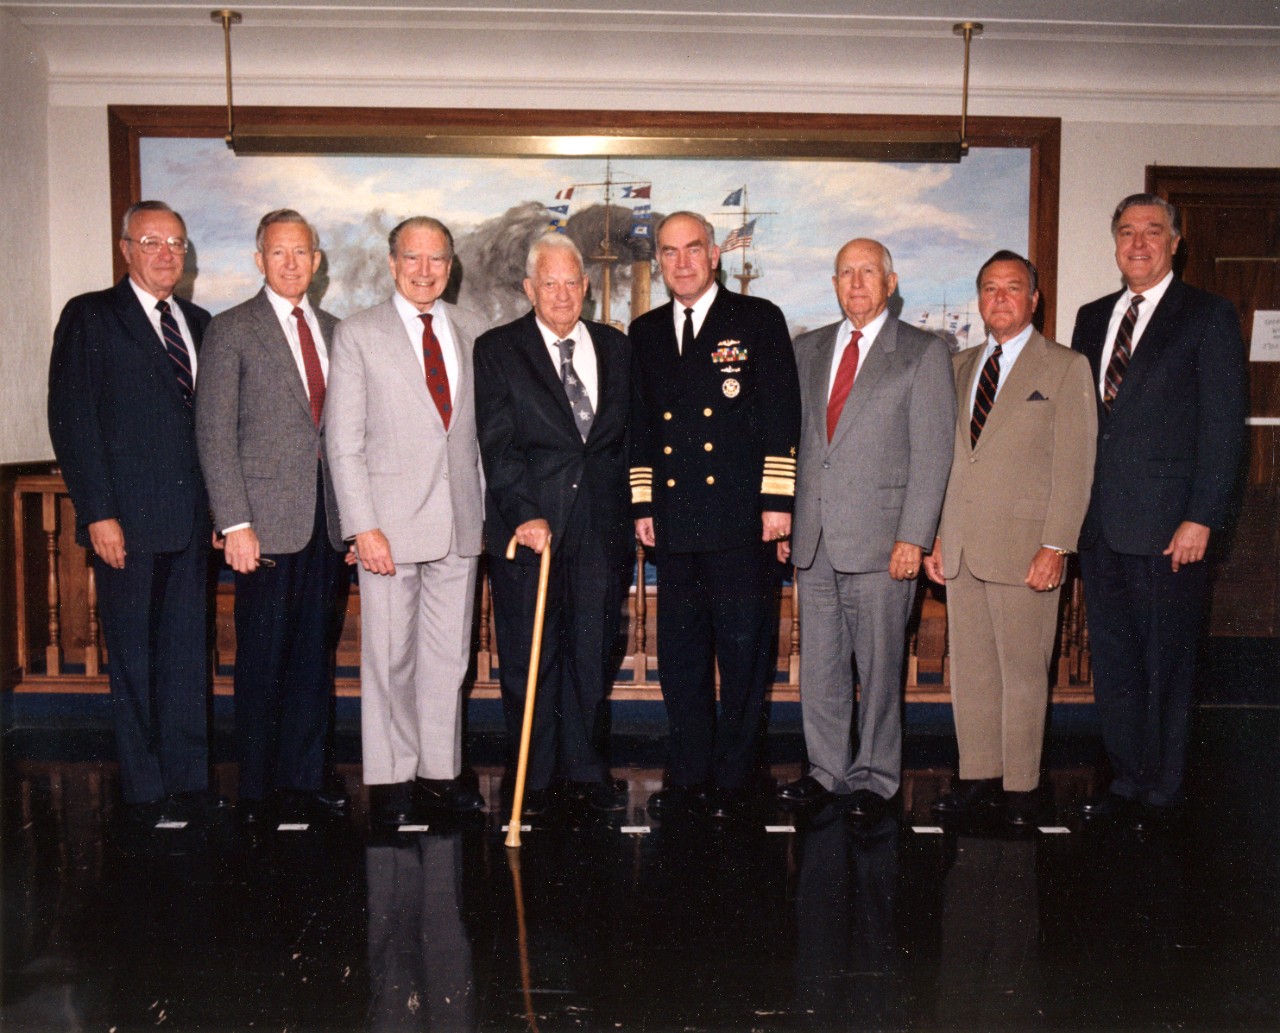 The current CNO, Admiral Frank Kelso, with former CNOs at the Pentagon, 19 October 1990. Those present are (from left to right): Admiral Carlisle A.H. Trost, CNO in 1986-1990; Admiral Thomas Hayward, CNO in 1978-1982;   Admiral Elmo Zumwalt, CNO in 1970-1974; Admiral Arleigh A. Burke, CNO in 1955-1961; Admiral Kelso; Admiral Thomas Moorer, CNO in 1967-1970; Admiral James Holloway, CNO in 1974-1978; and Admiral James Watkins, CNO in 1982-1986.  Photographed by Dave Wilson. Official U.S. Navy Photograph, from the collections of the Naval History and Heritage Command.